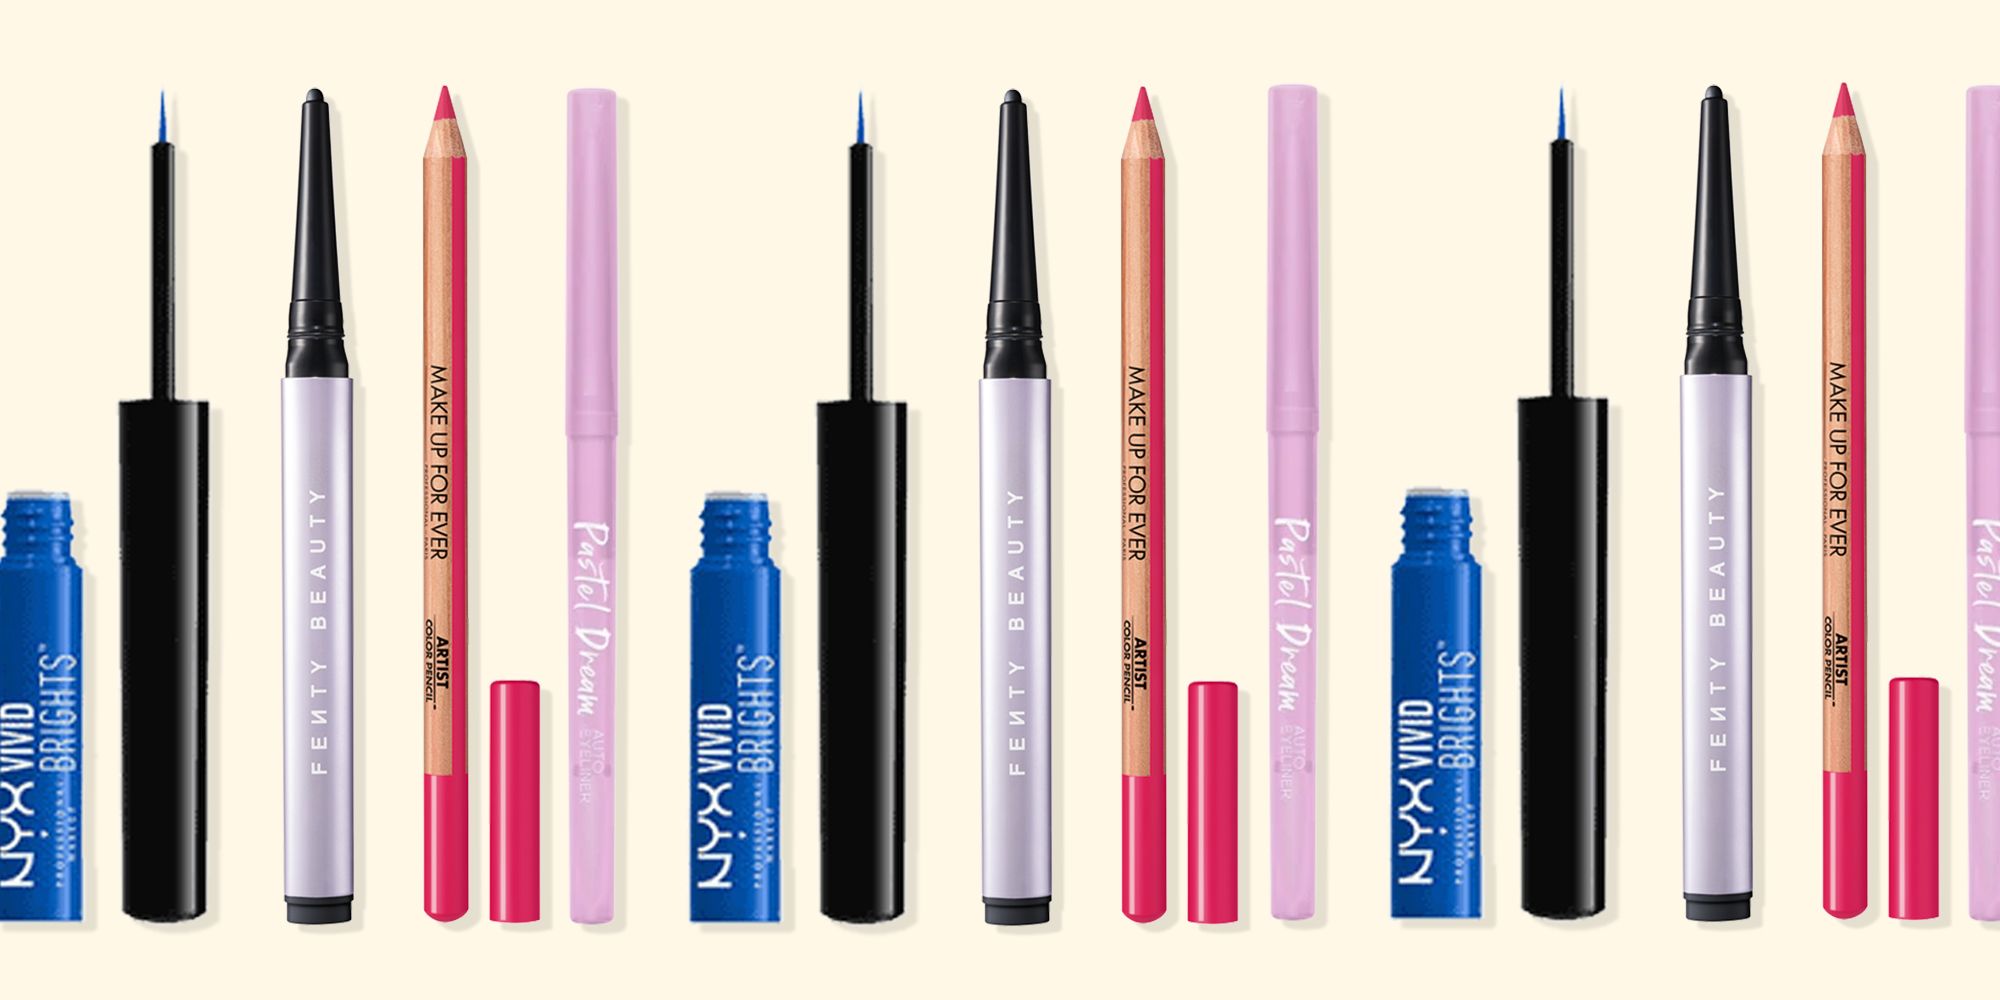 The 5 Best Colored Eyeliners to Match Your Eye Color